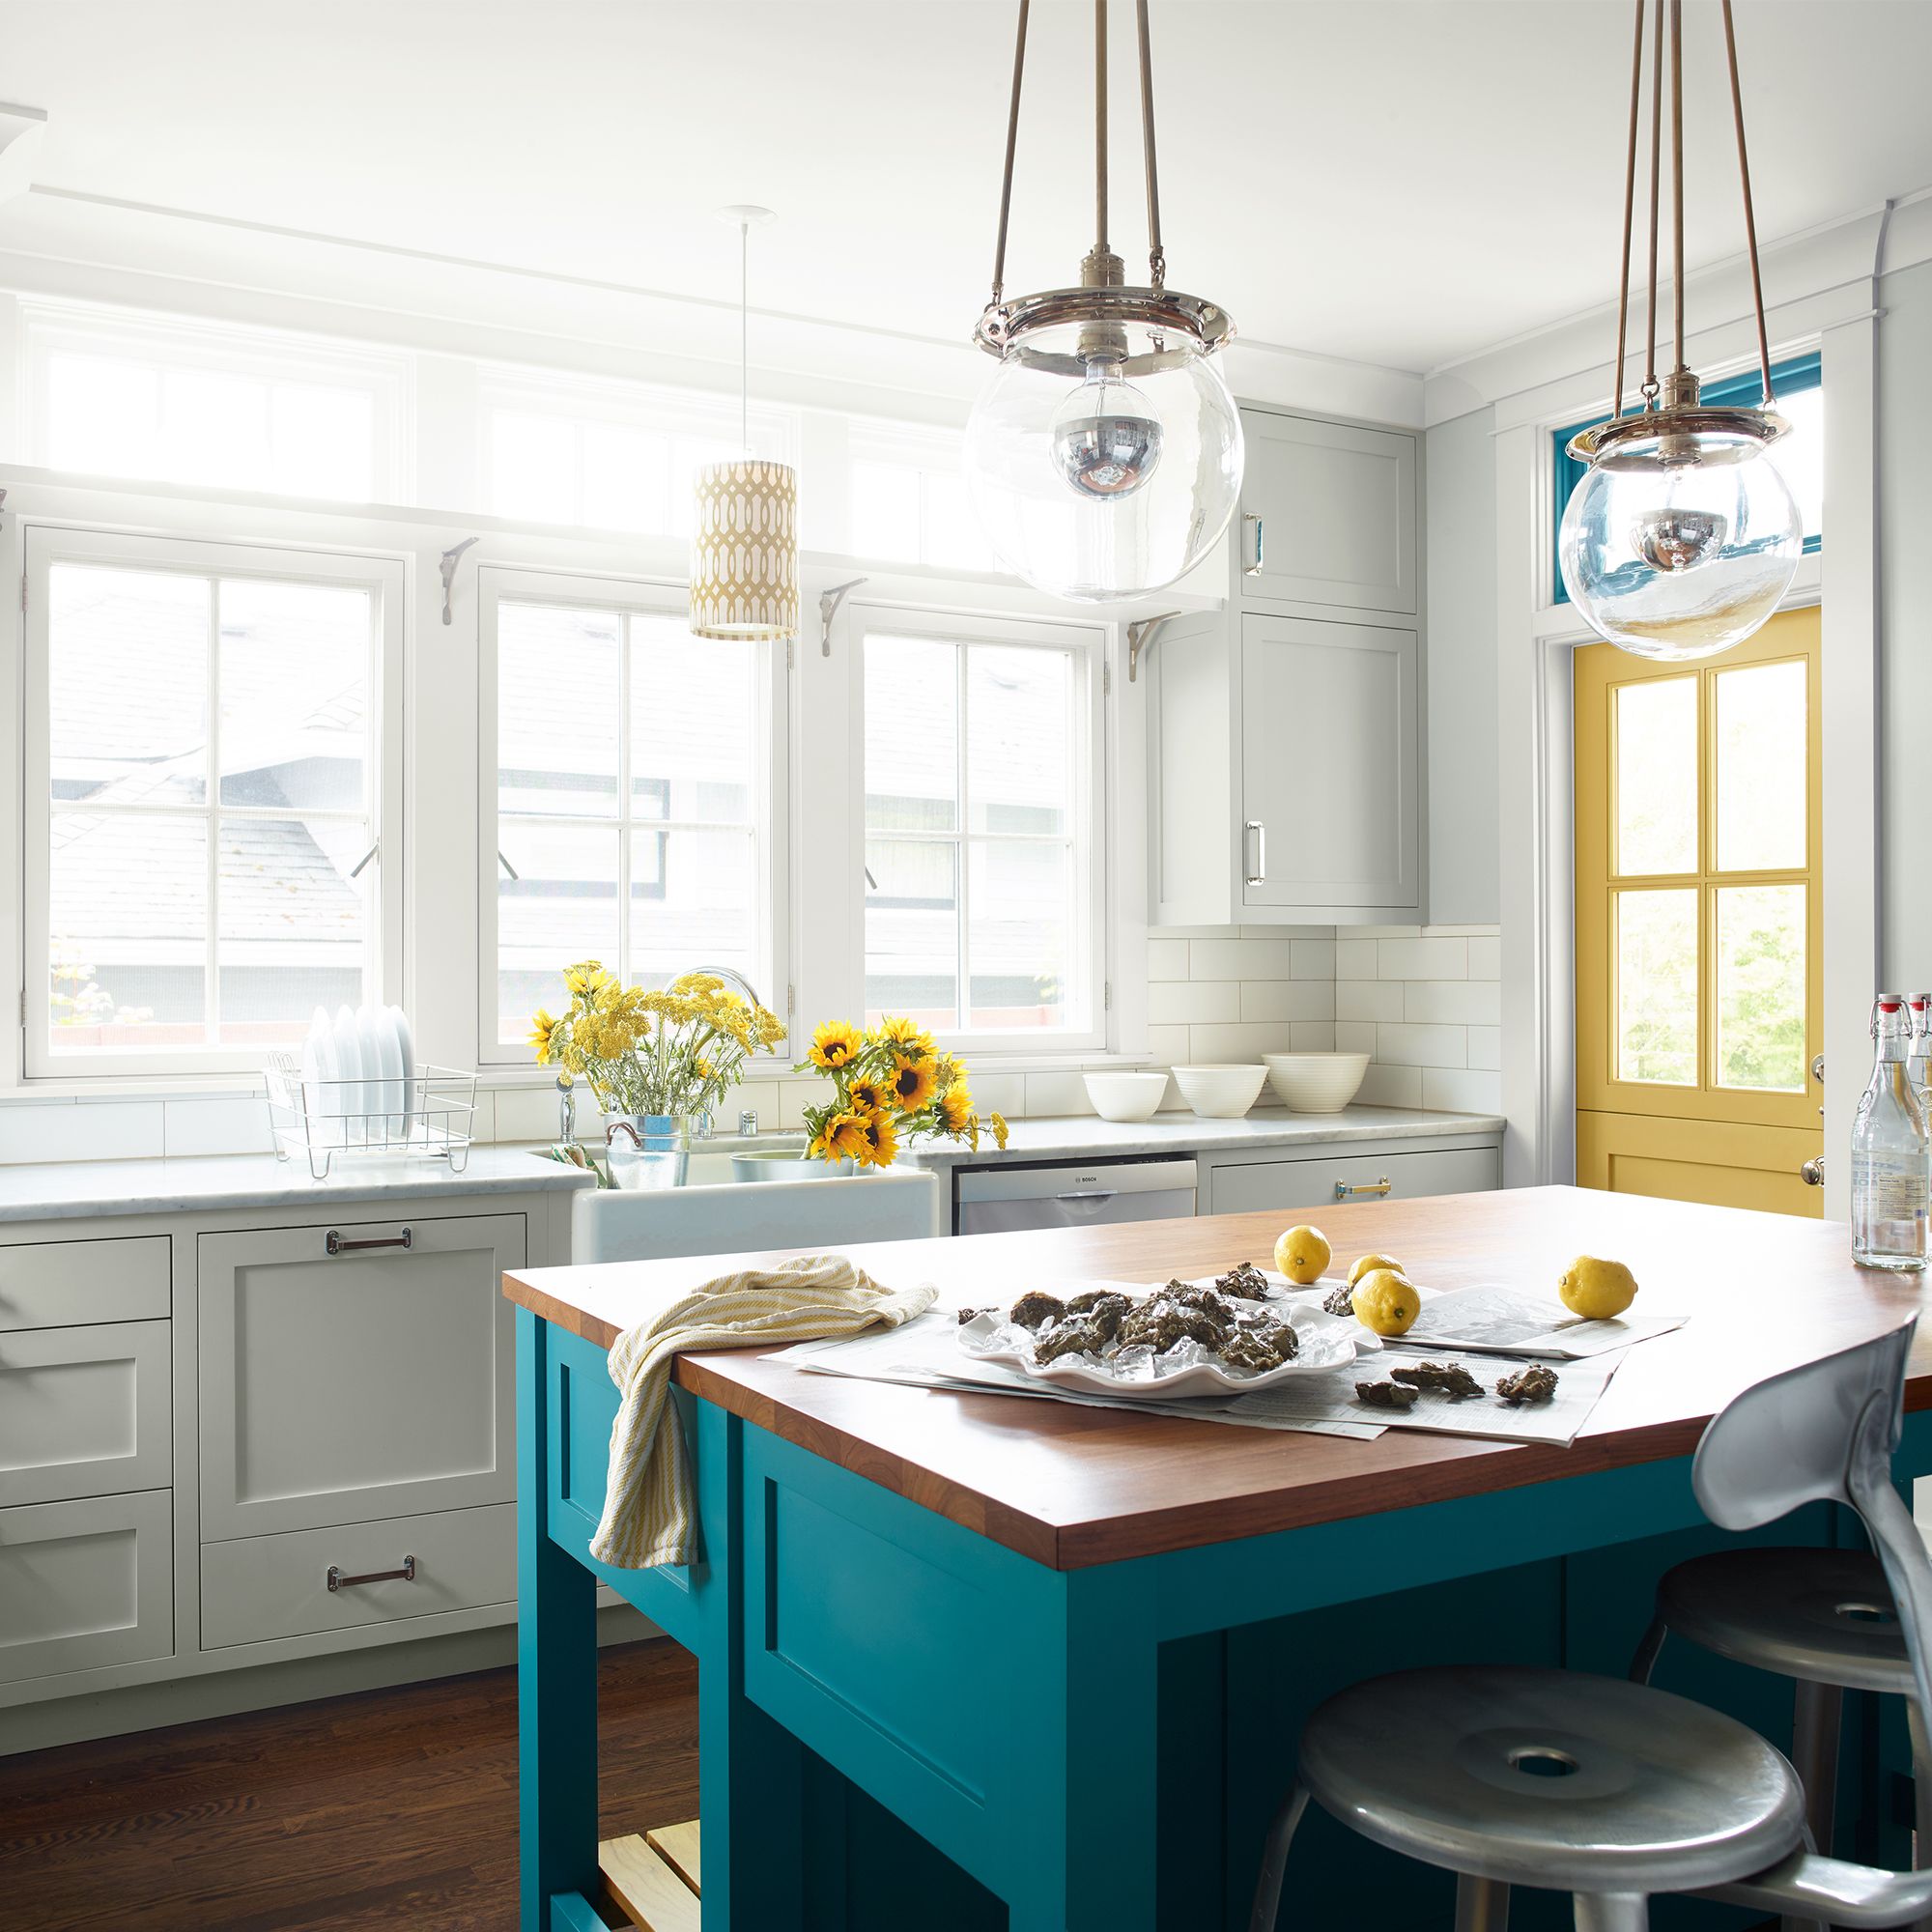 Kitchen cabinets in Gray Owl ADVANCE Interior Paint - Satin, Island in Caribbean Blue water ADVANCE Interior Paint